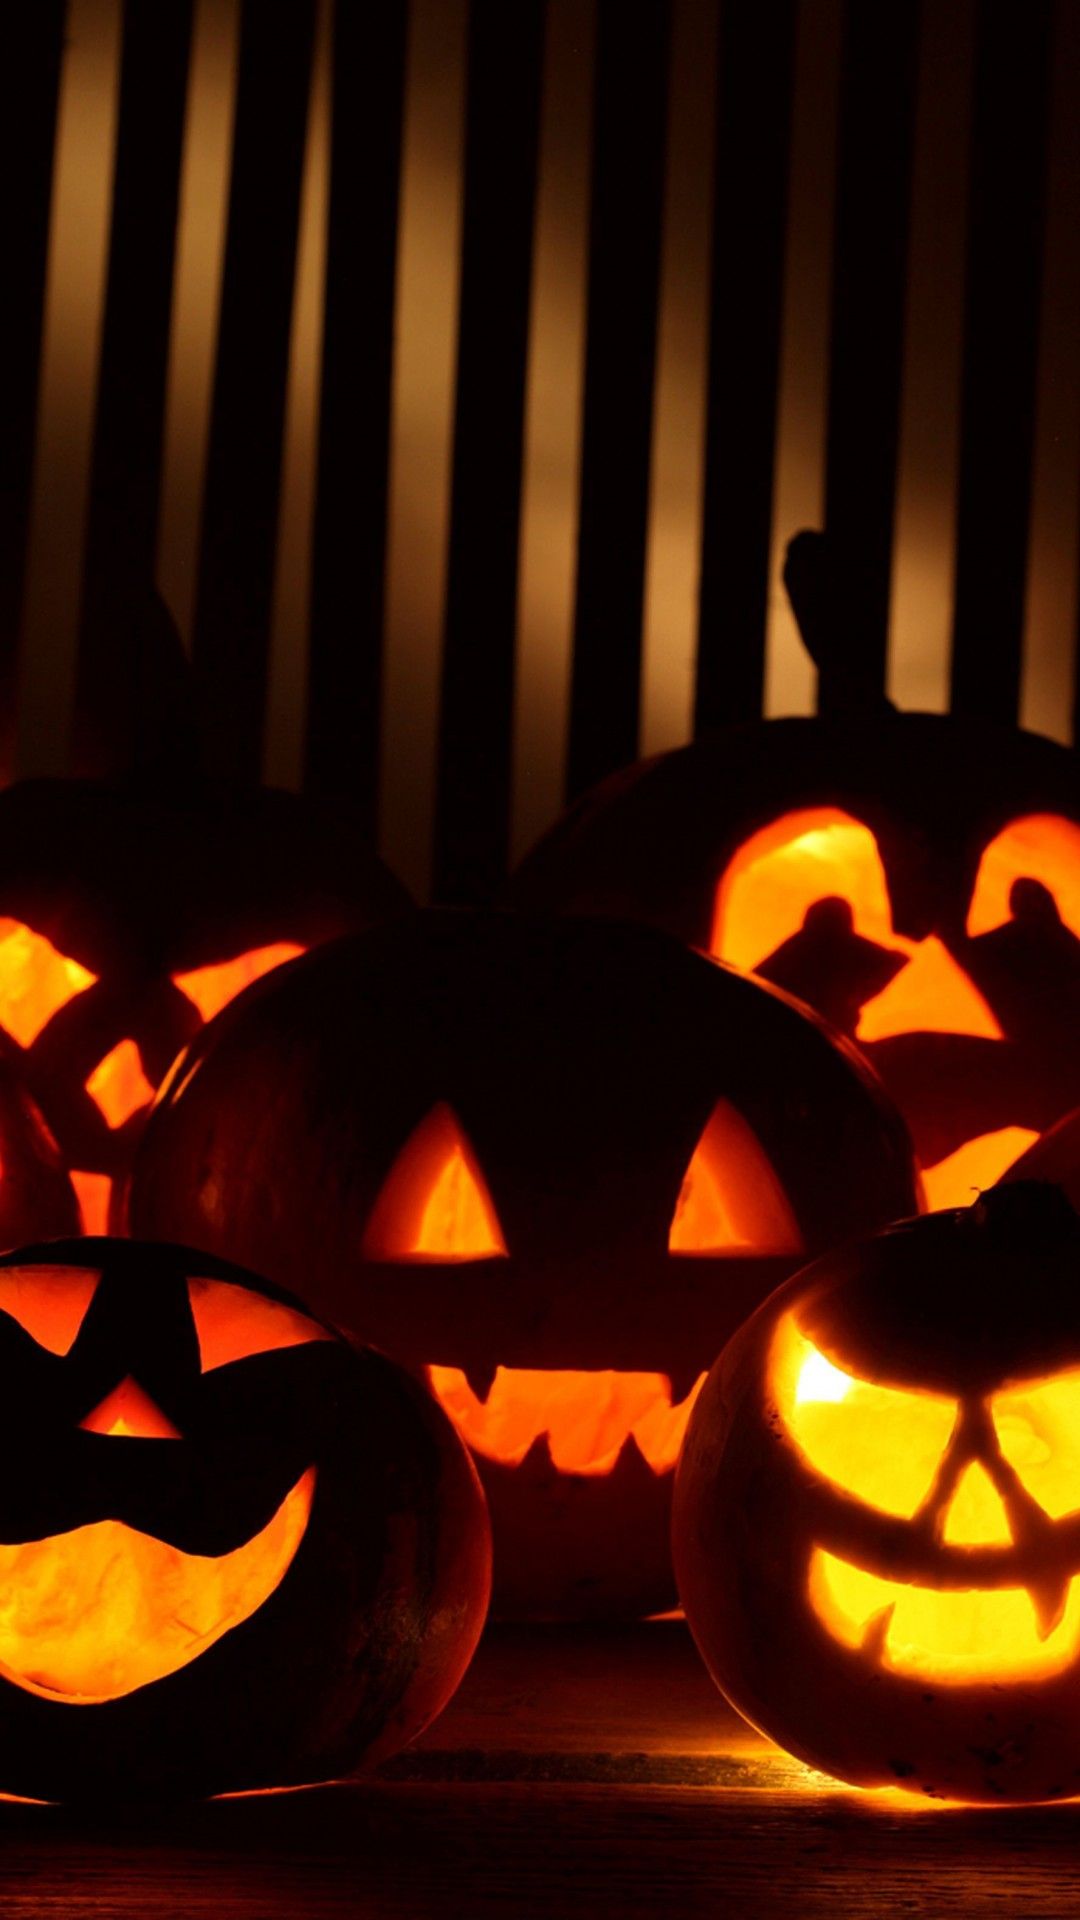 Wallpaper Pumpkins, Scary, Dark, HD, 5K, Celebrations / Halloween,. Wallpaper for iPhone, Android, Mobile and Desktop